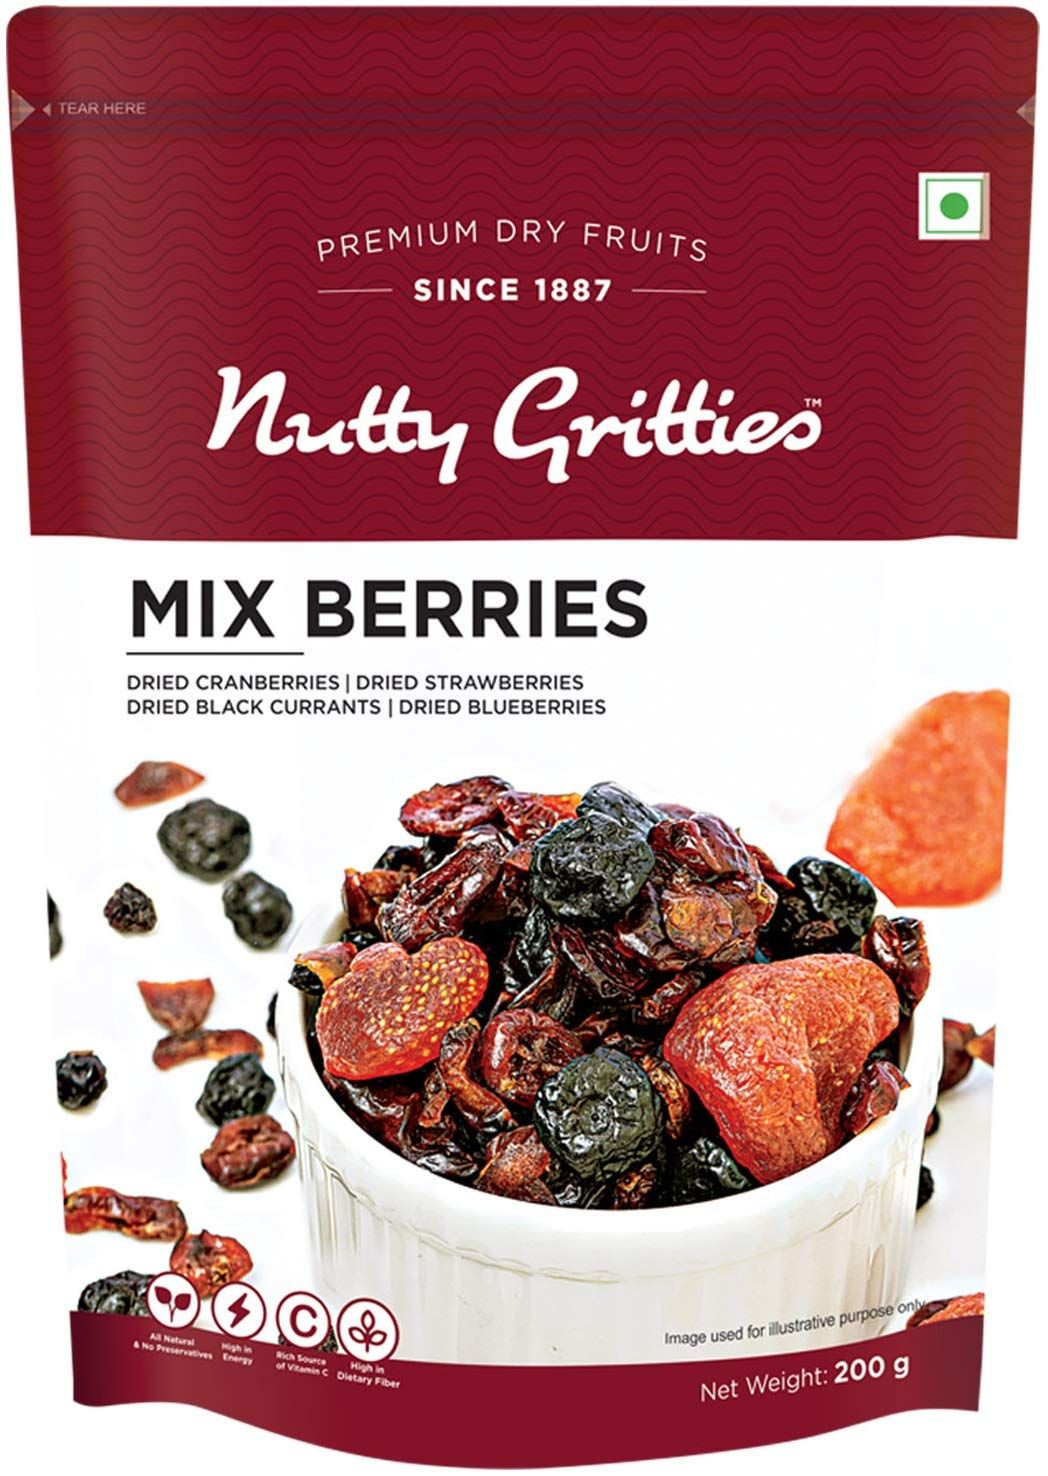 Nutty Gritties Mix Berries Image